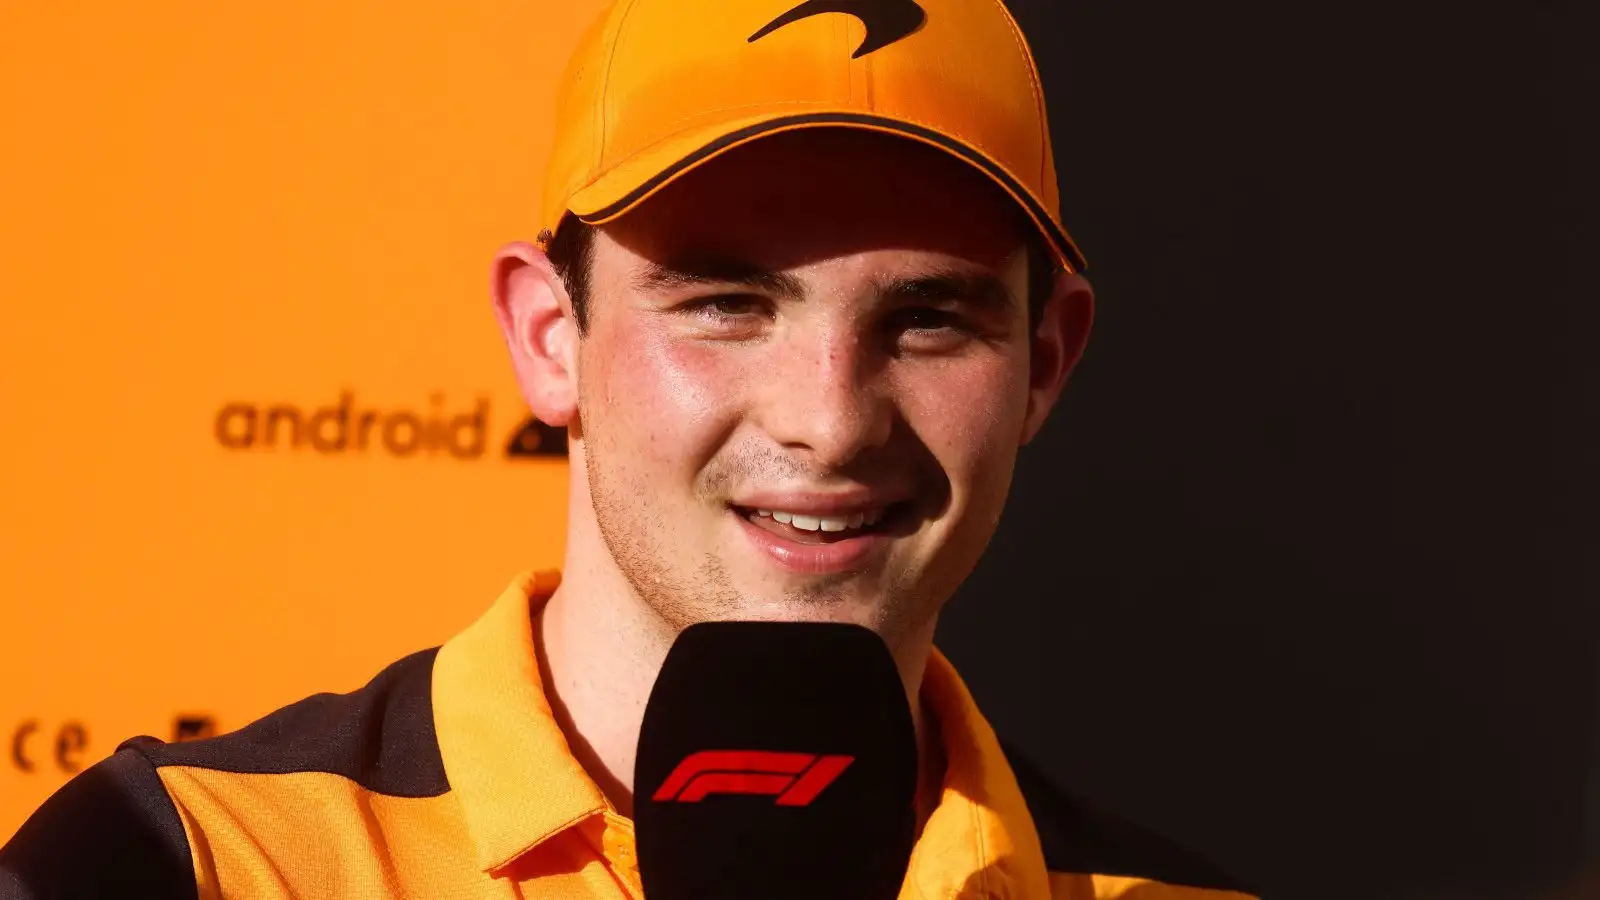 McLaren reserve driver Pato O'Ward interviewed by F1.